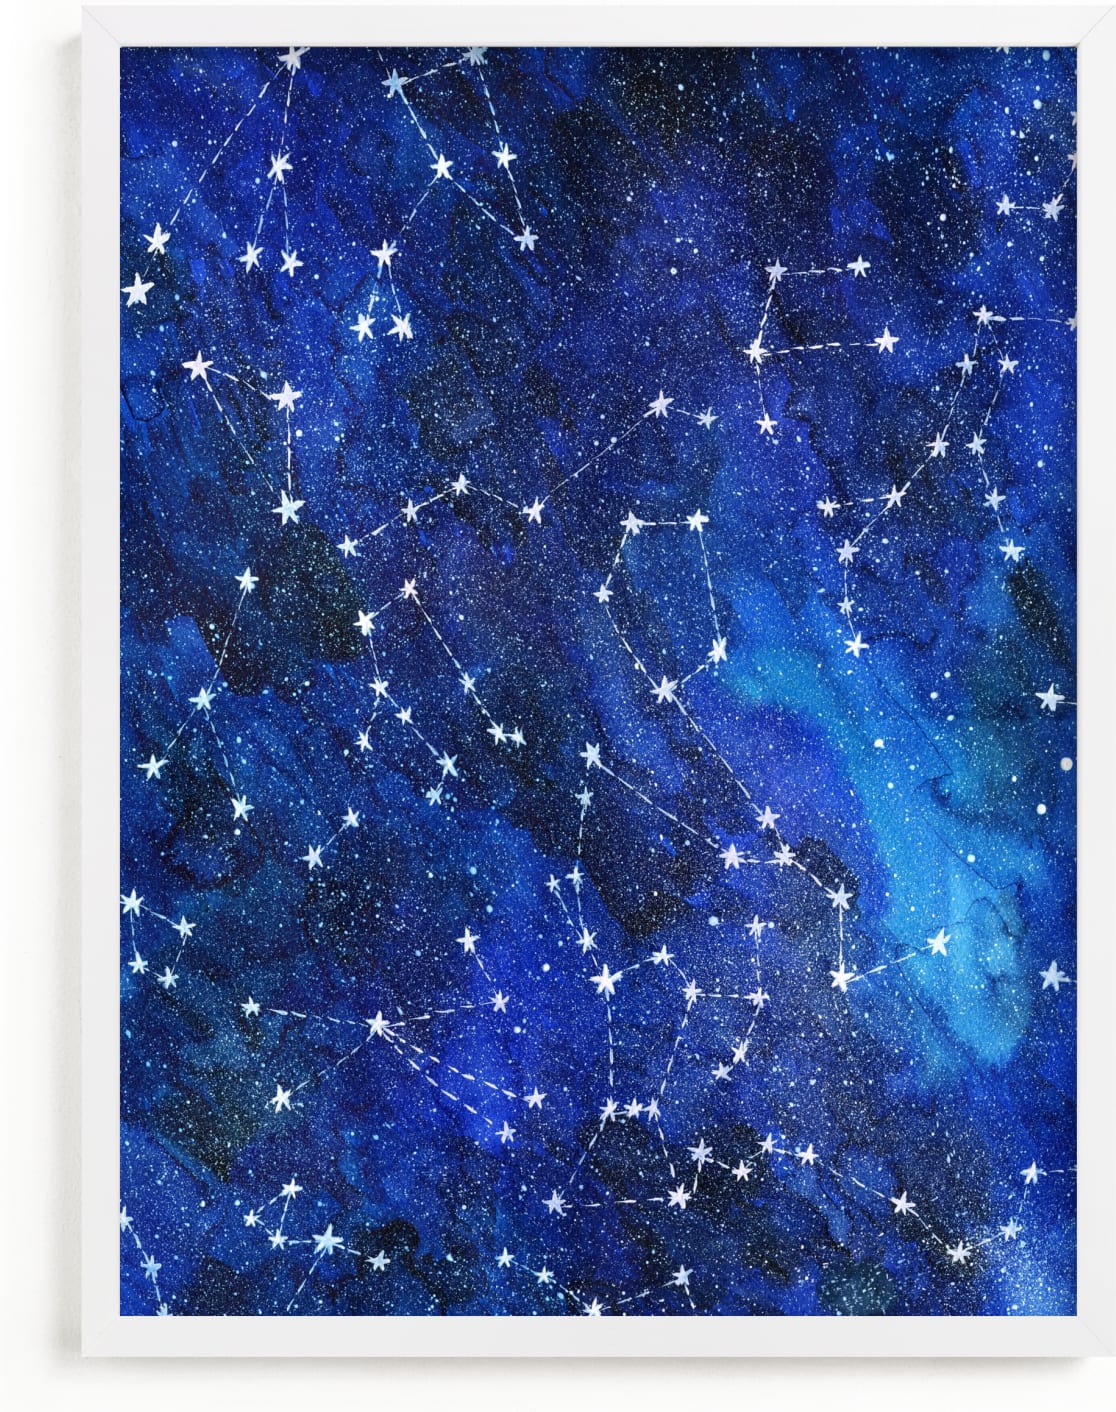 This is a blue kids wall art by Alexandra Dzh called Constellations.